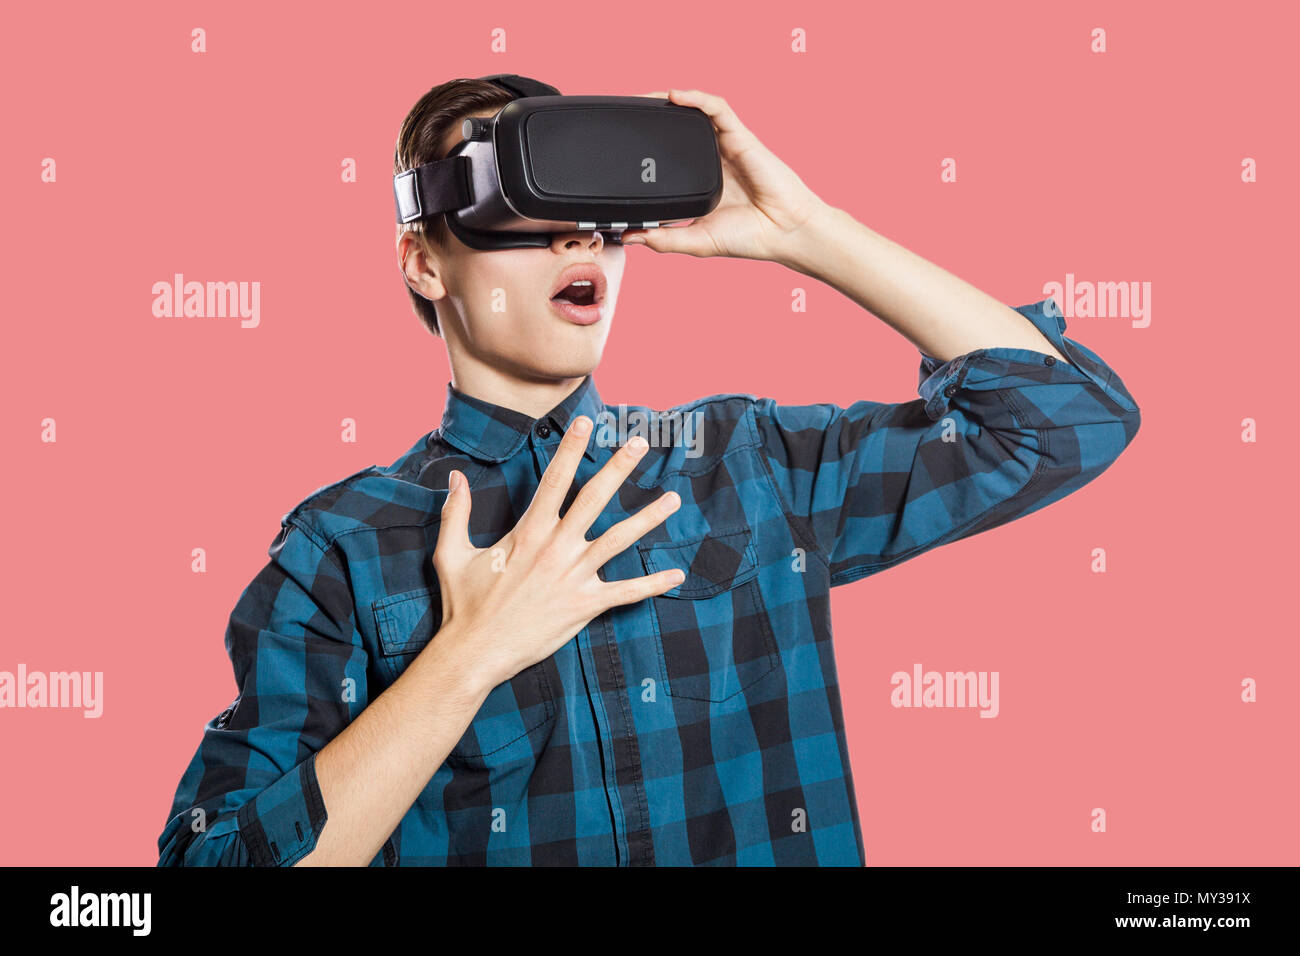 surprised young man with vr headset. studio shot, isolated on pink background. Stock Photo